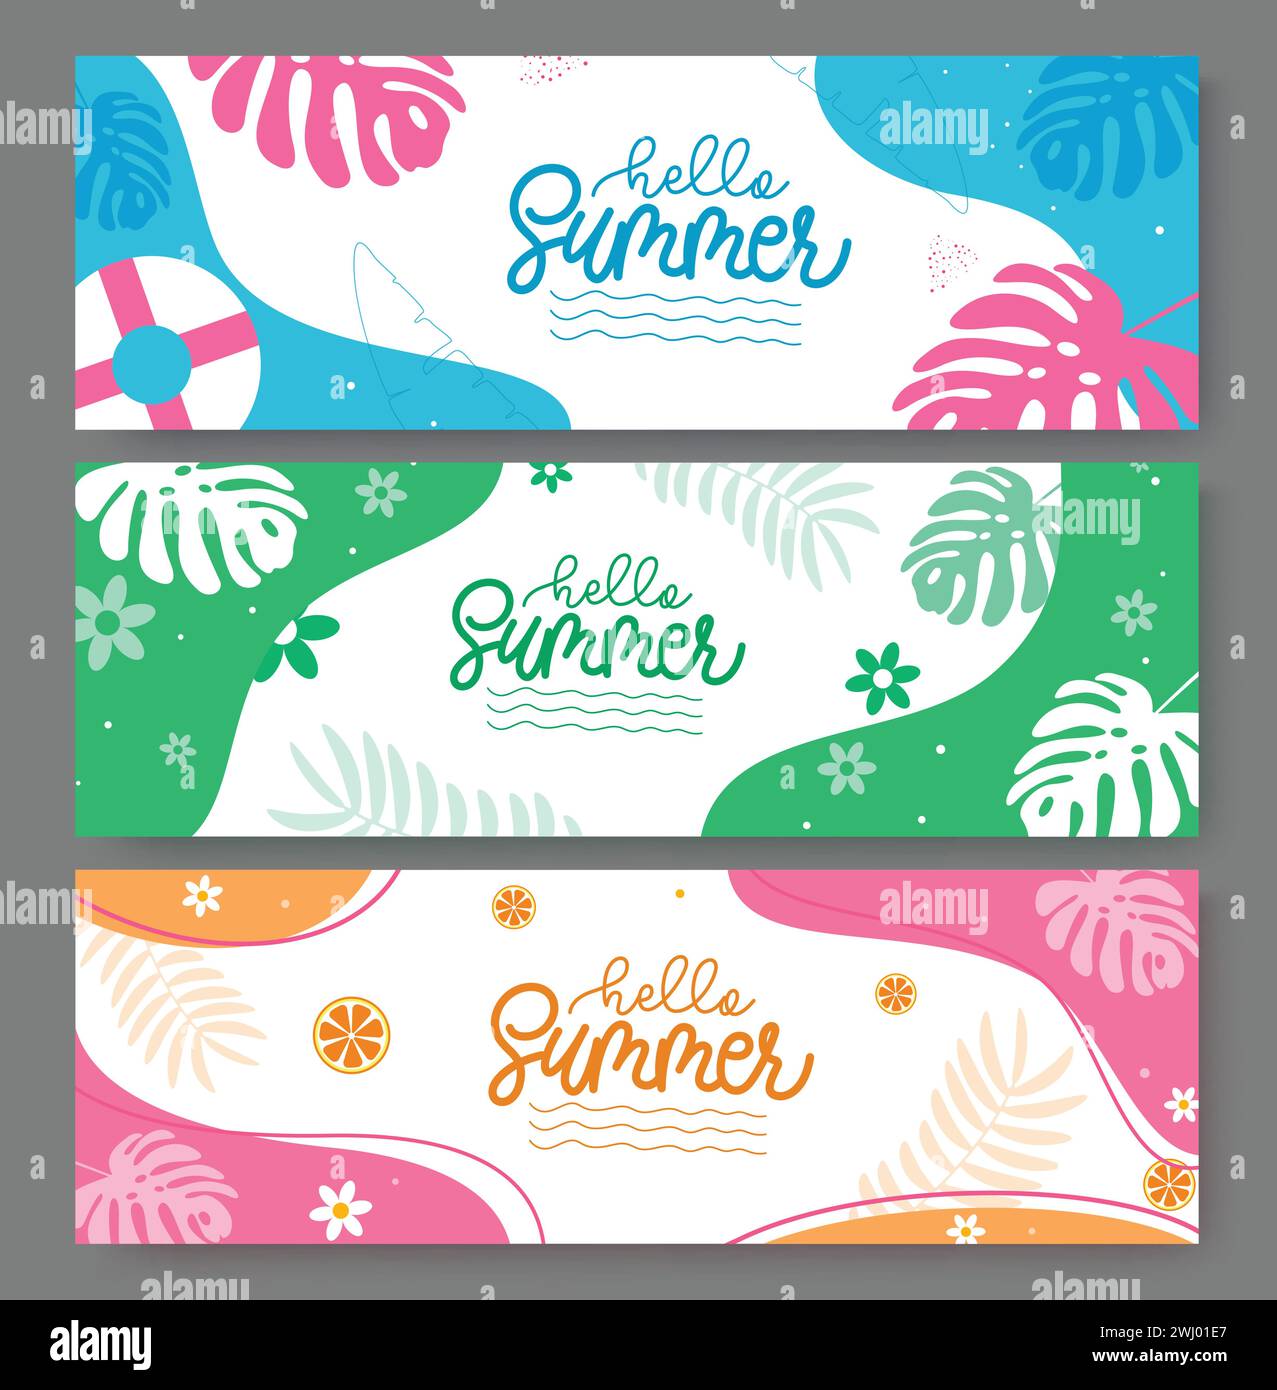 Hello summer abstract vector banner set. Summer hello greeting text with tropical leaves decoration elements for tropical background collection. Stock Vector